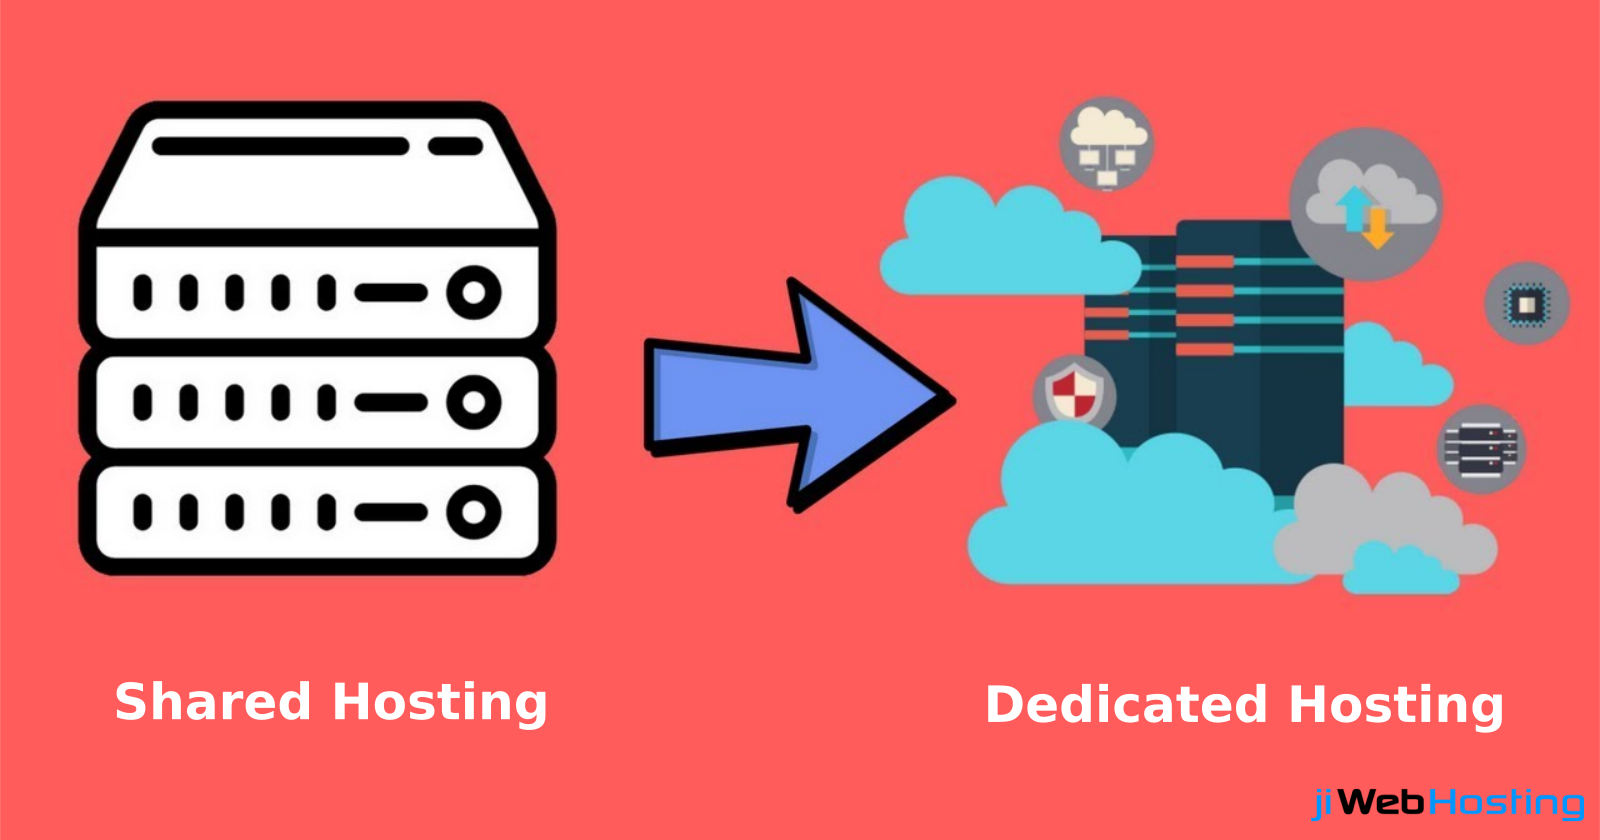 Is It the Time to Upgrade Your Hosting Plan?